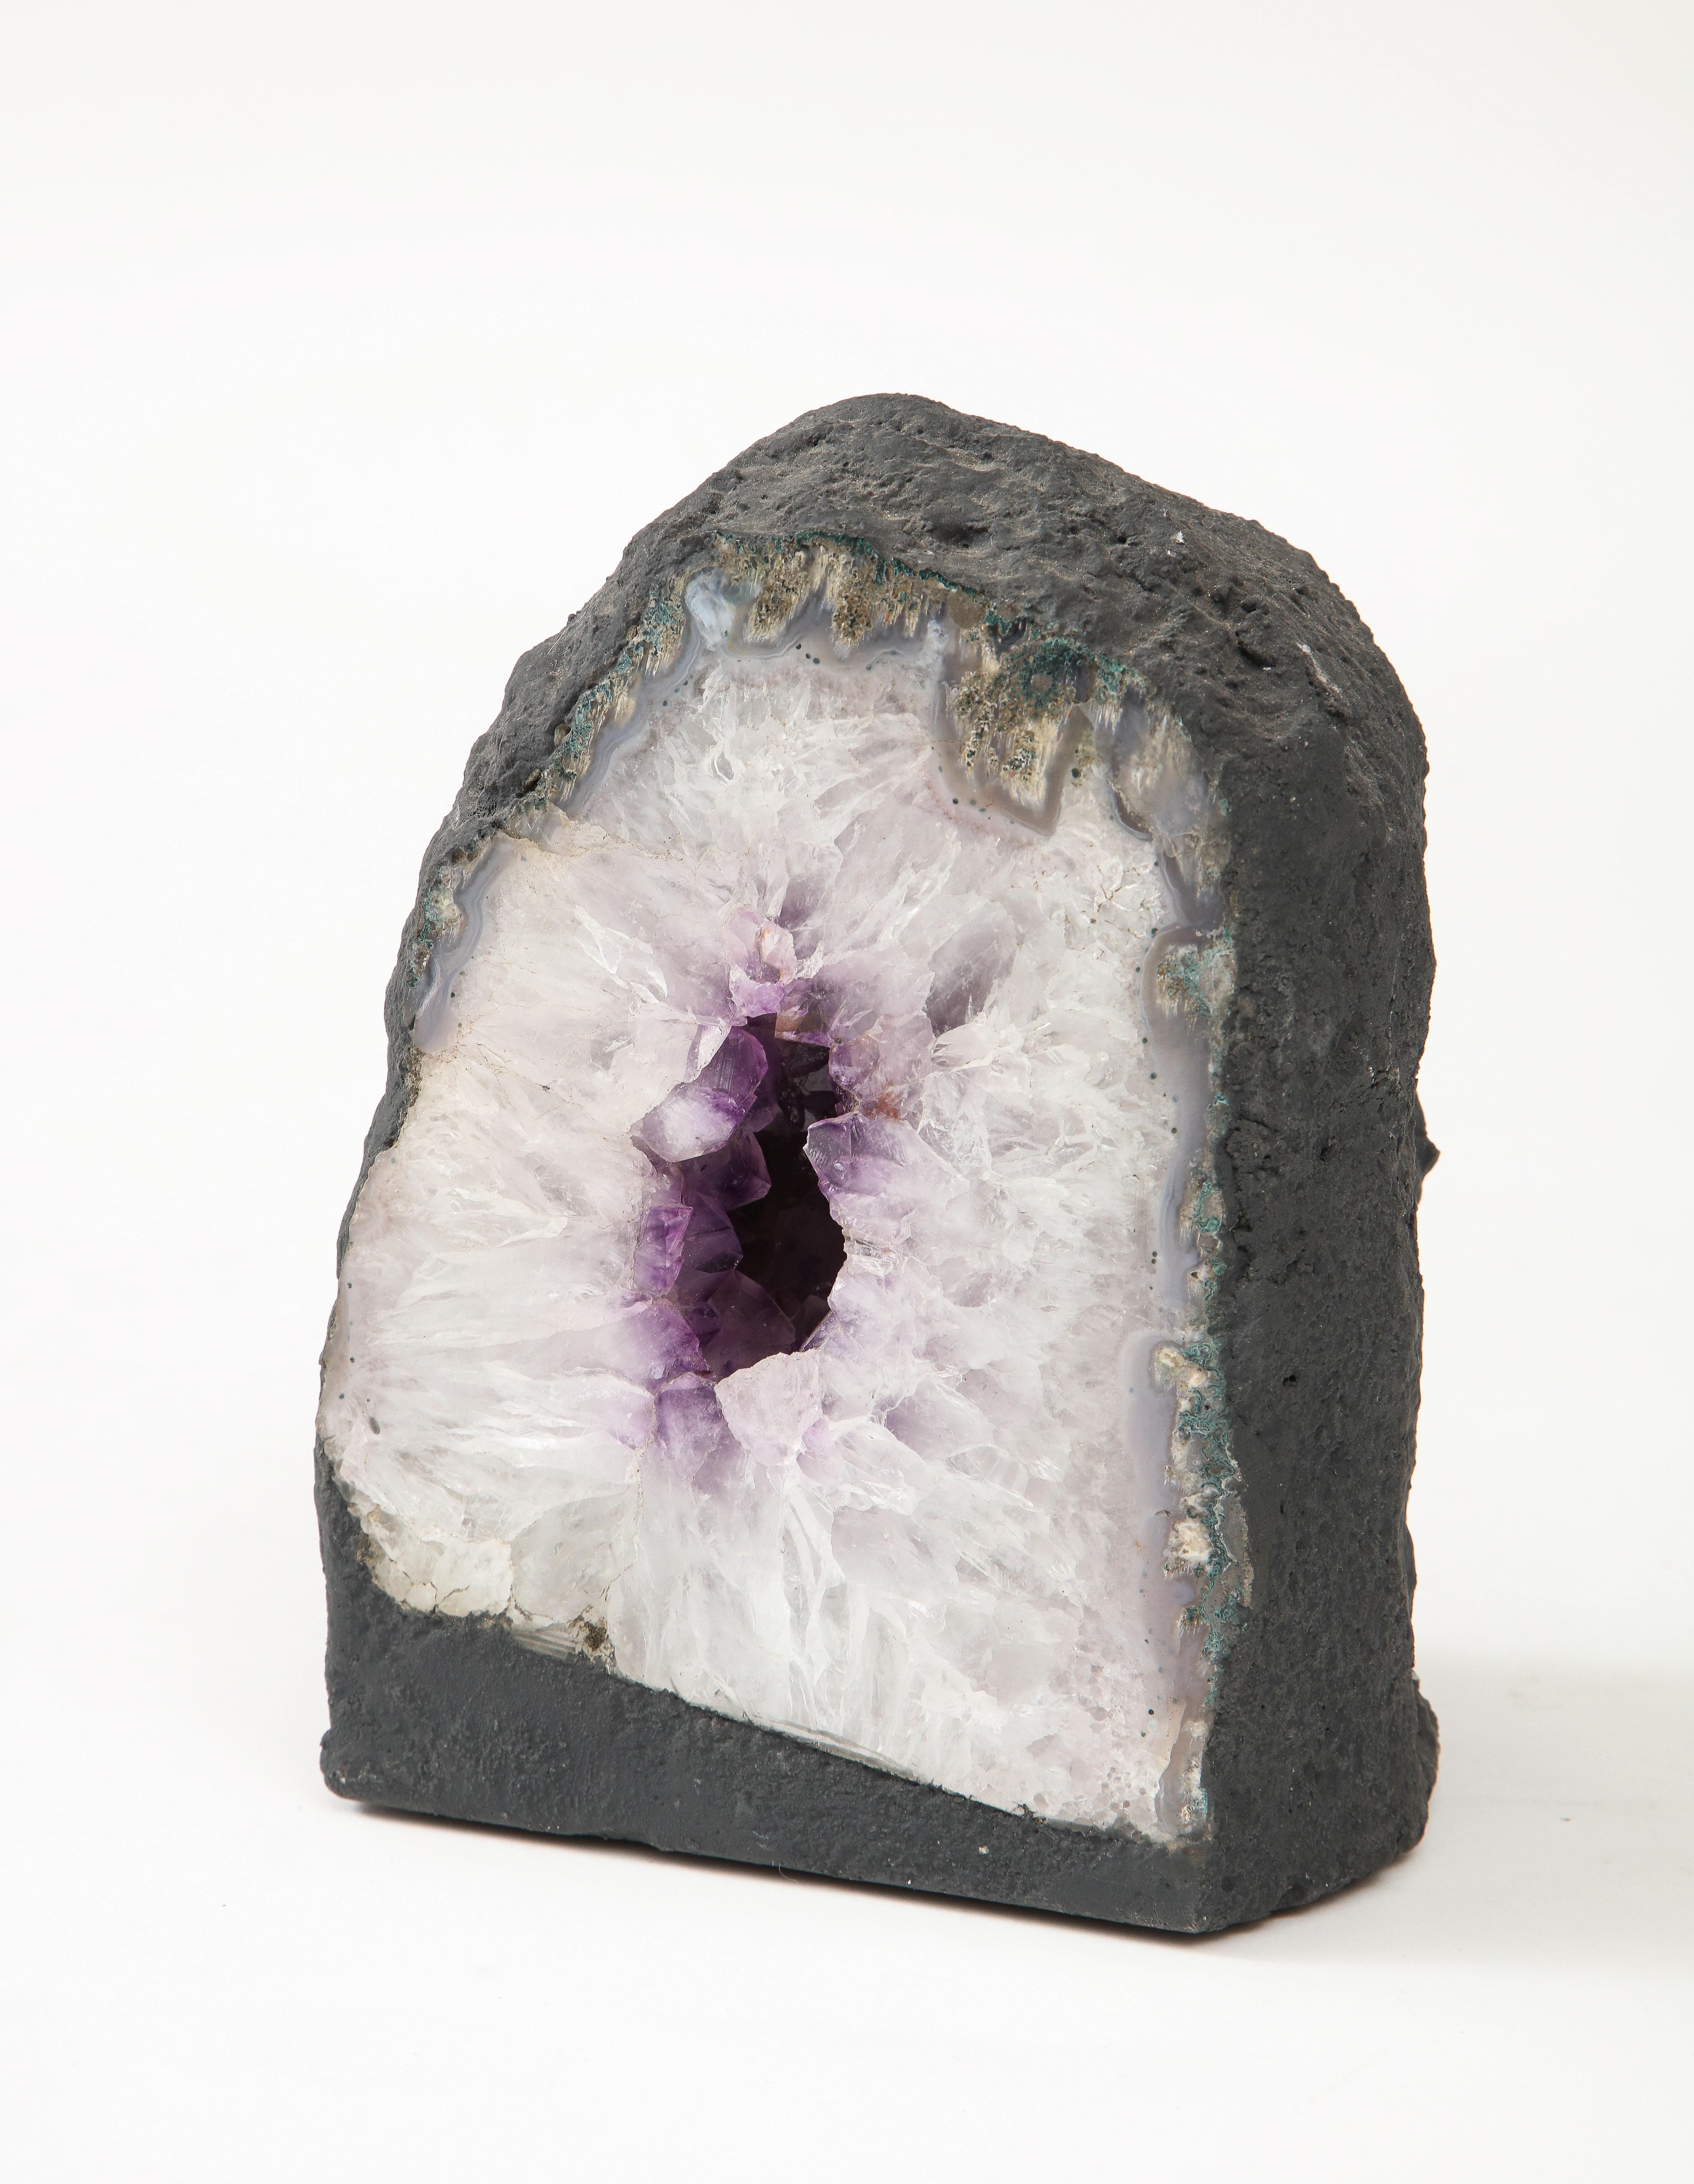 A large geode crystal specimen featuring an amethyst center.